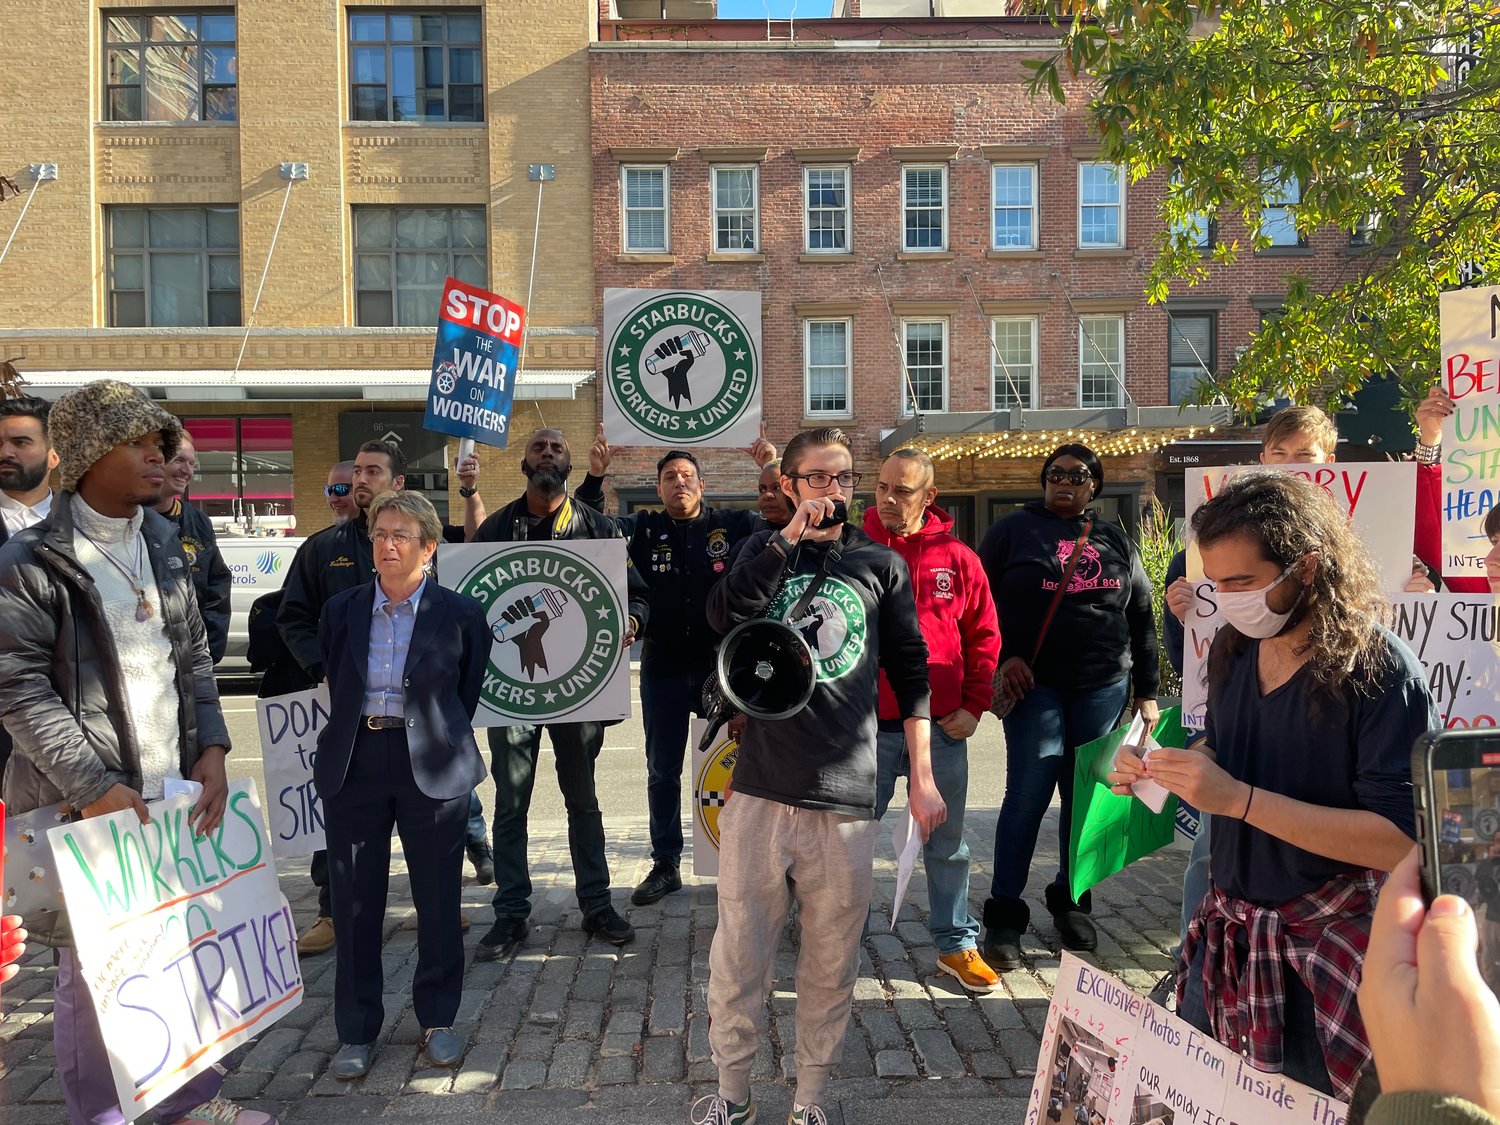 Starbucks workers and their union allies rallied outside the Reserve Roastery on West 15th Street last month. A reinspection report following a visit from state health officials Dec. 15th found that Starbucks 'sells potentially hazardous foods' but found no evidence of mold, even though workers said they showed inspectors photos of moldy ice.